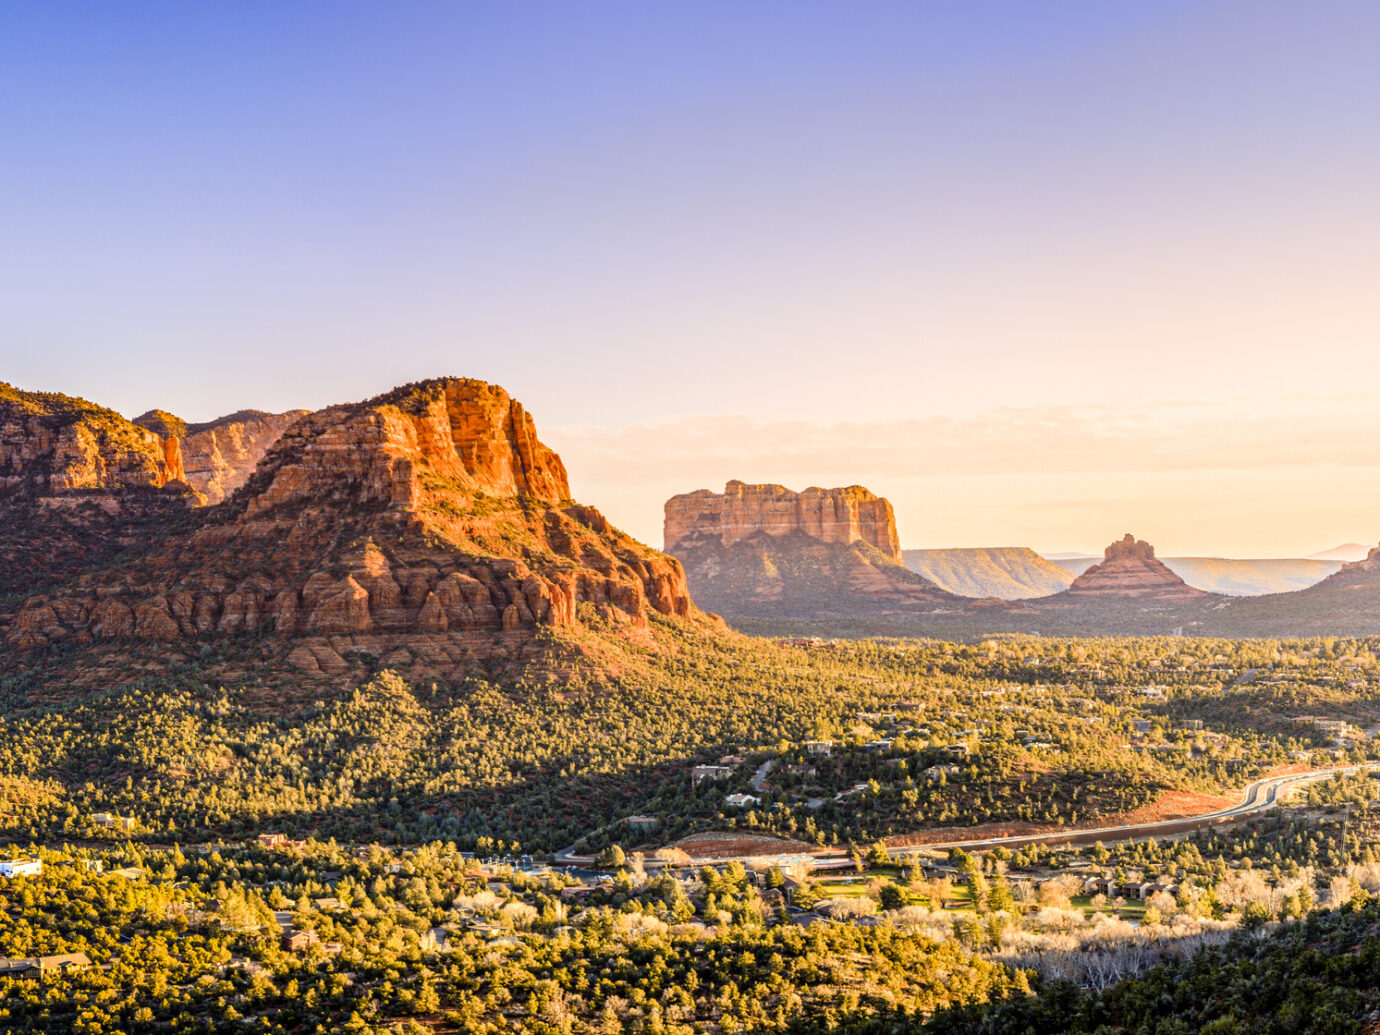 Scenic view to Courthouse Butte, Bell Rock and surrounding red rocks formations in Sedona, Arizona at sunset